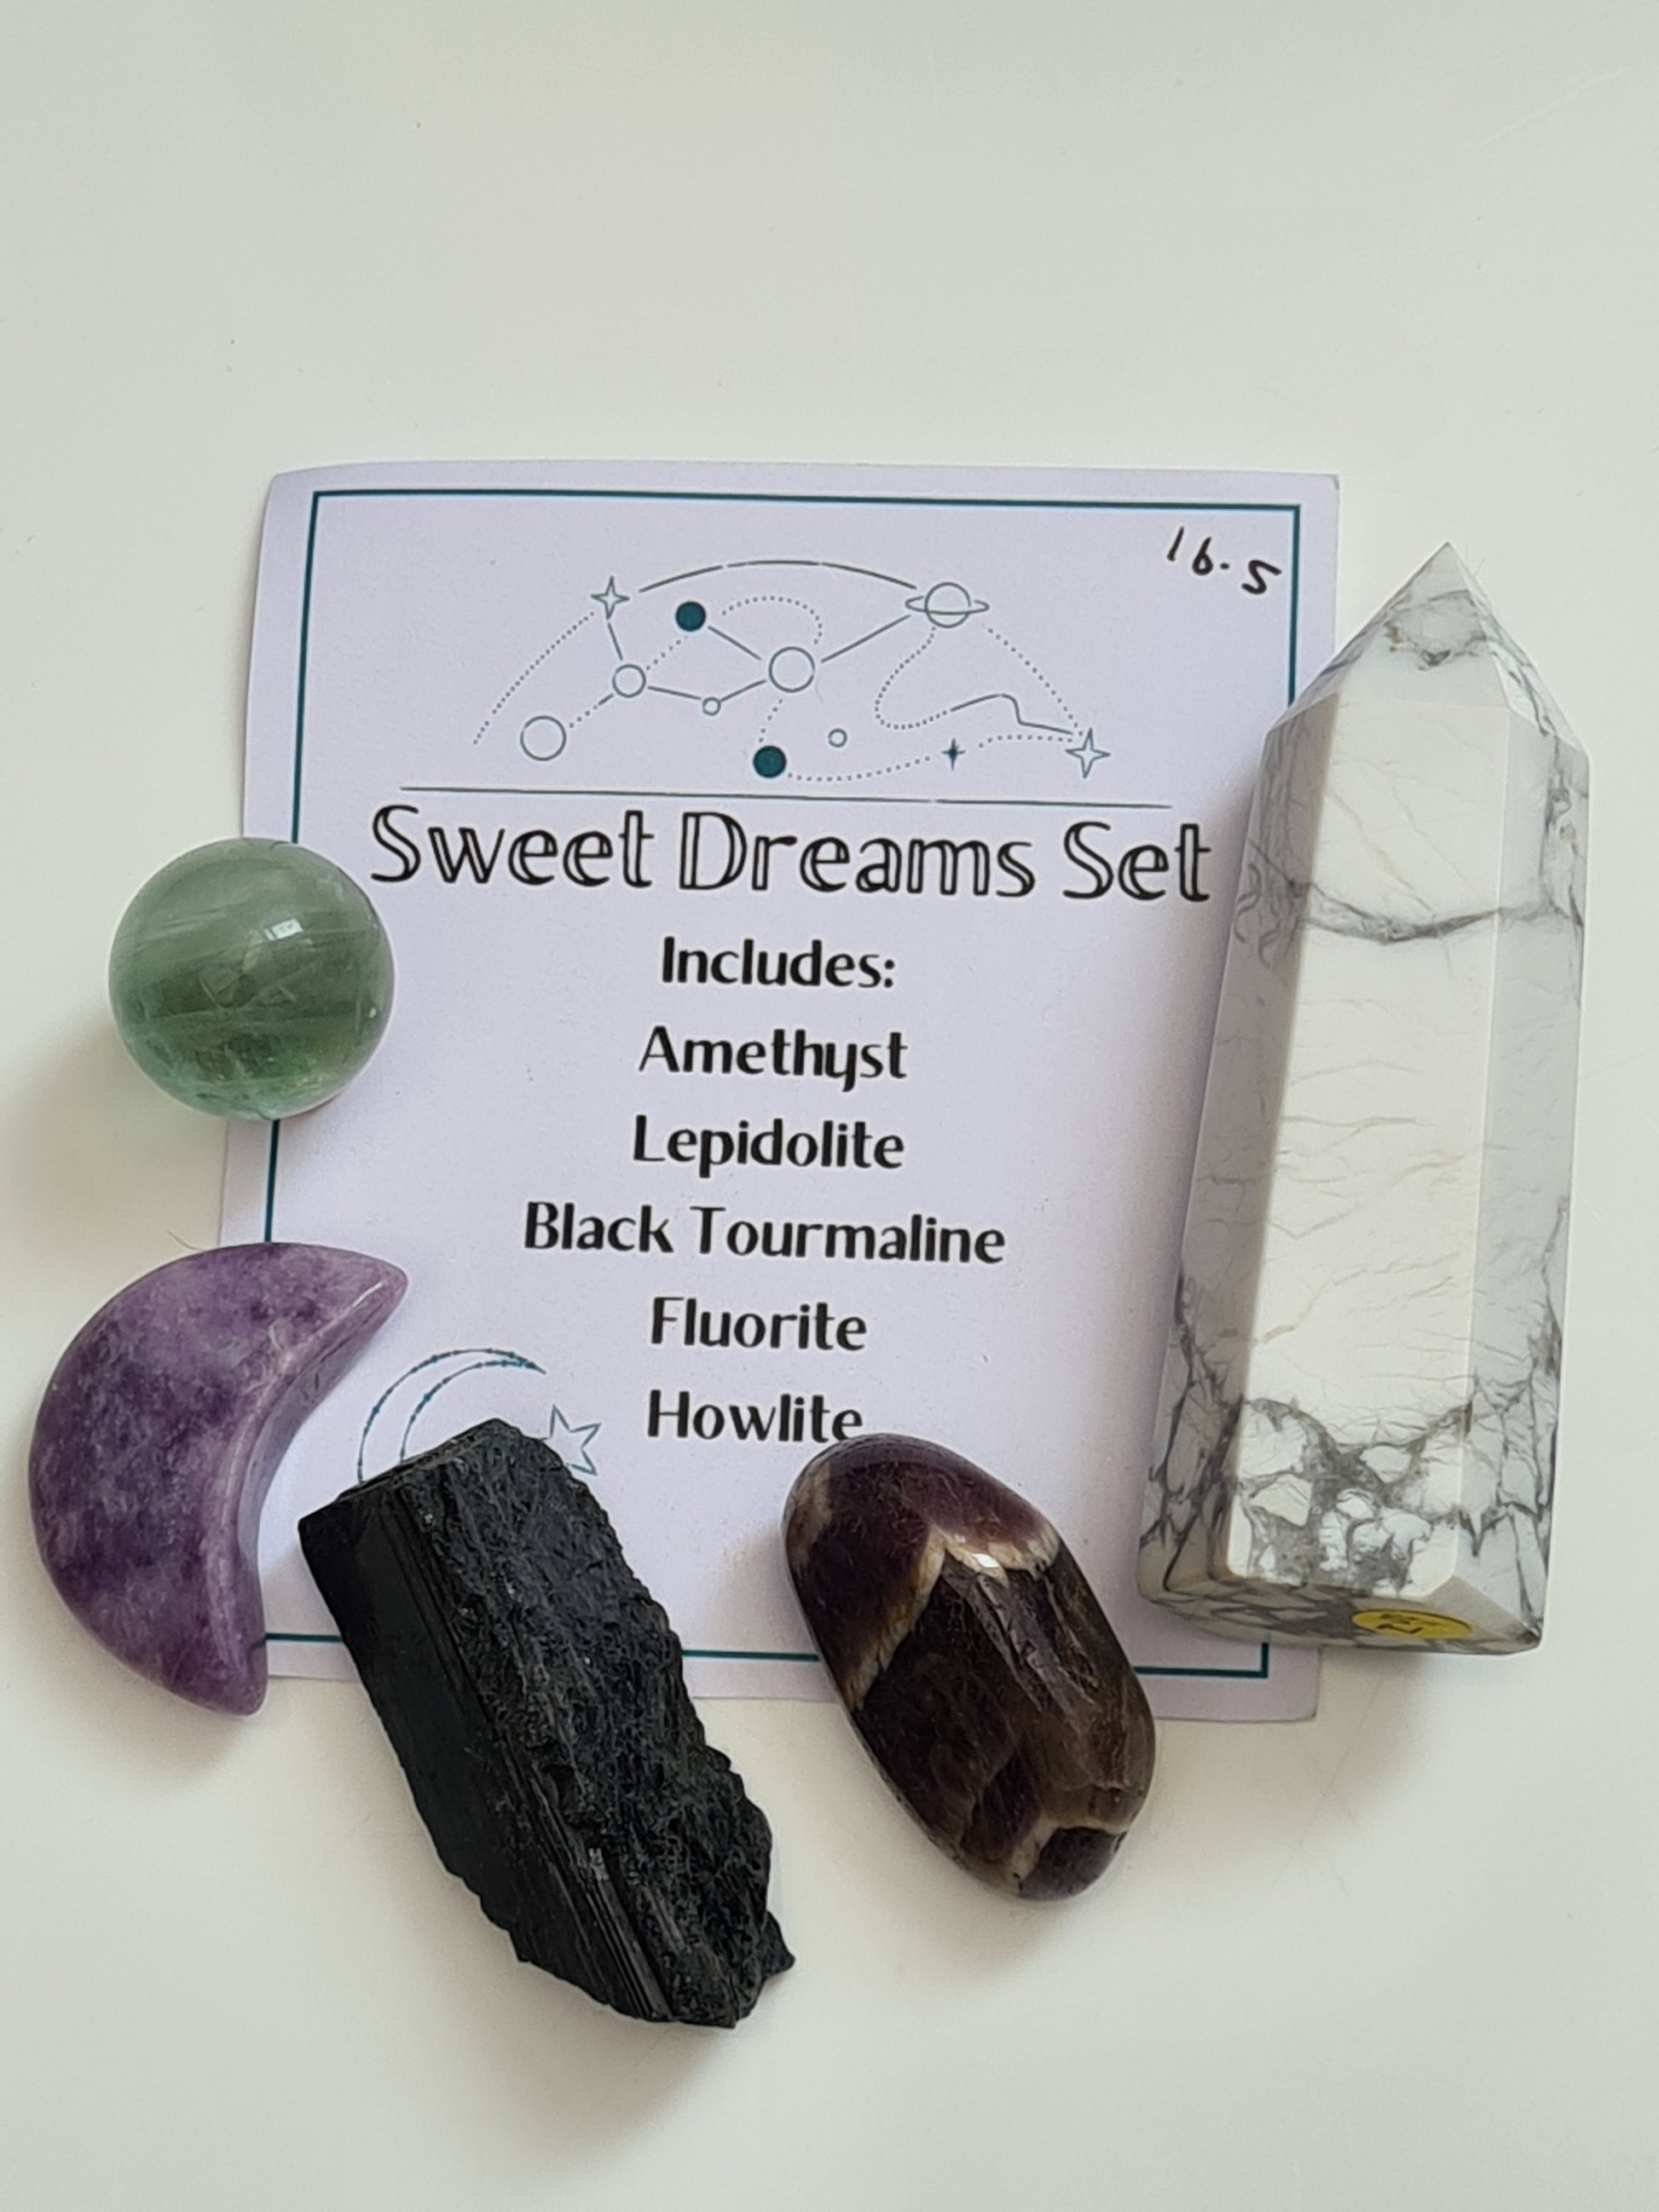 Sweet Dreams Crystal set to include Dream Amethyst, Fluorite, Lepidolite, Black Tourmaline and Howlite. Perfect set for those who need a restful sleep